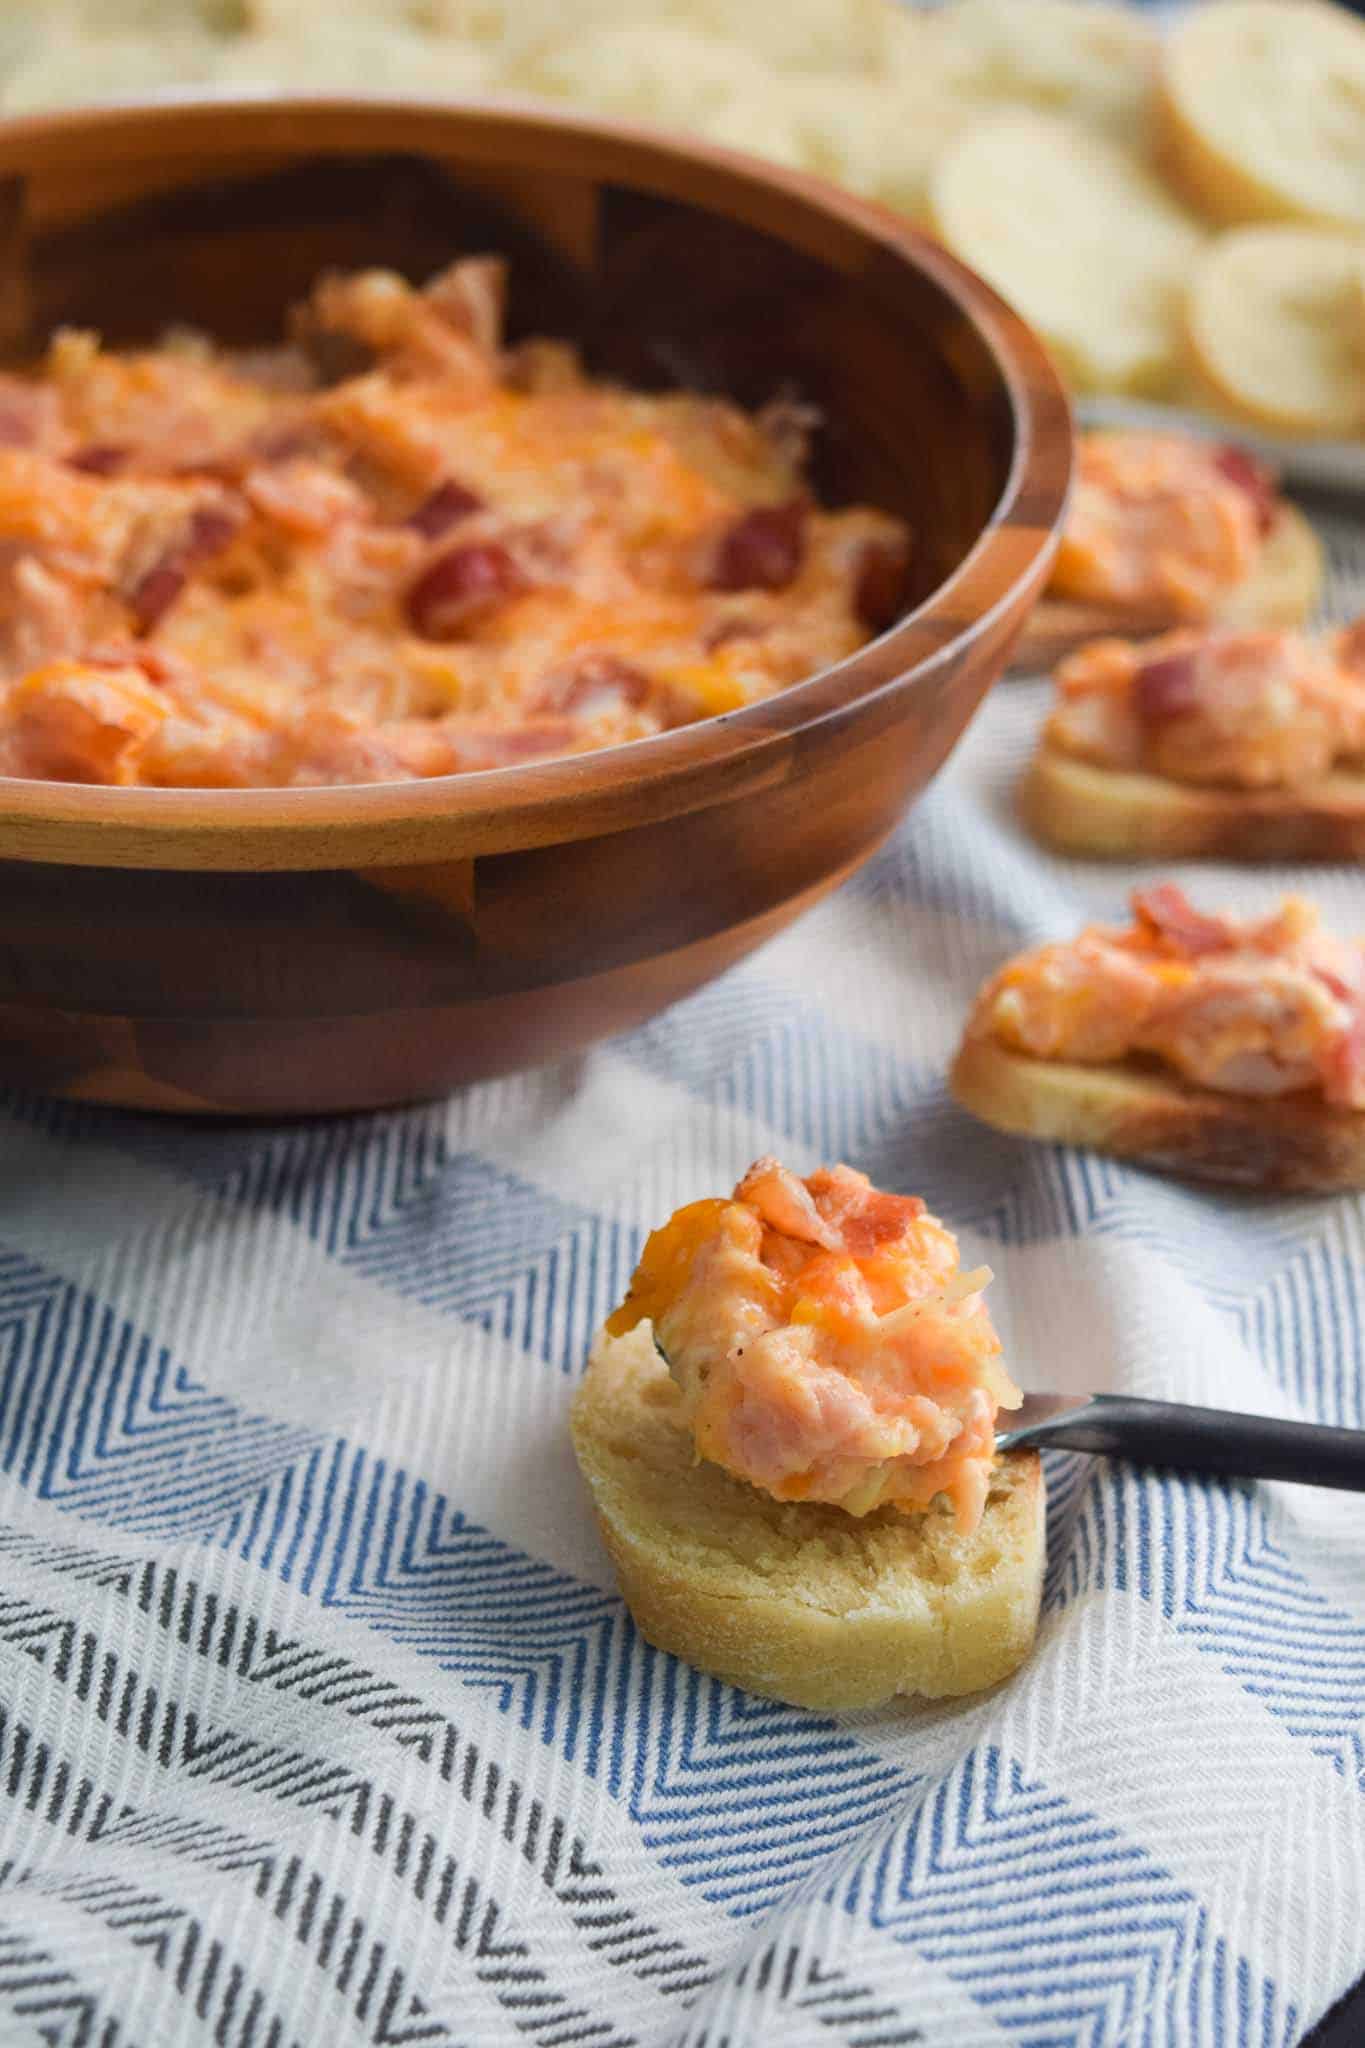 Kentucky Hot Brown Dip in bowl spooned onto crostini for serving